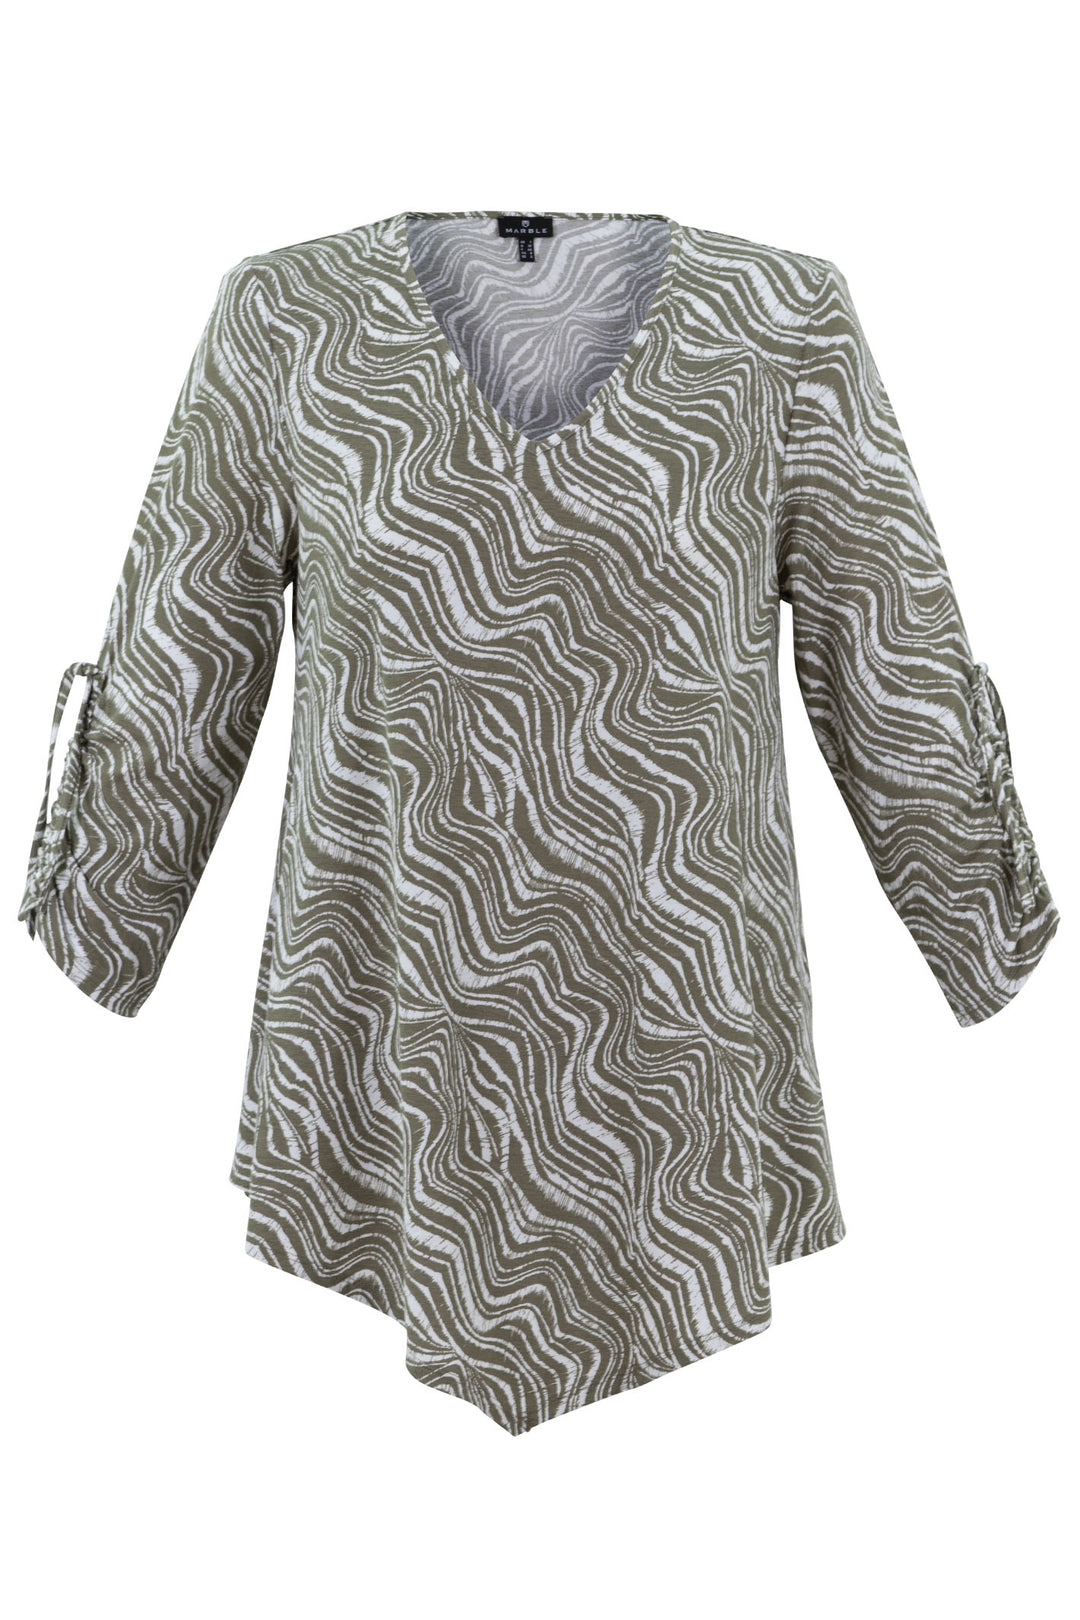 Marble 7416 123 Khaki Green Wave Print V-Neck Tunic Top - Dotique Chesterfield